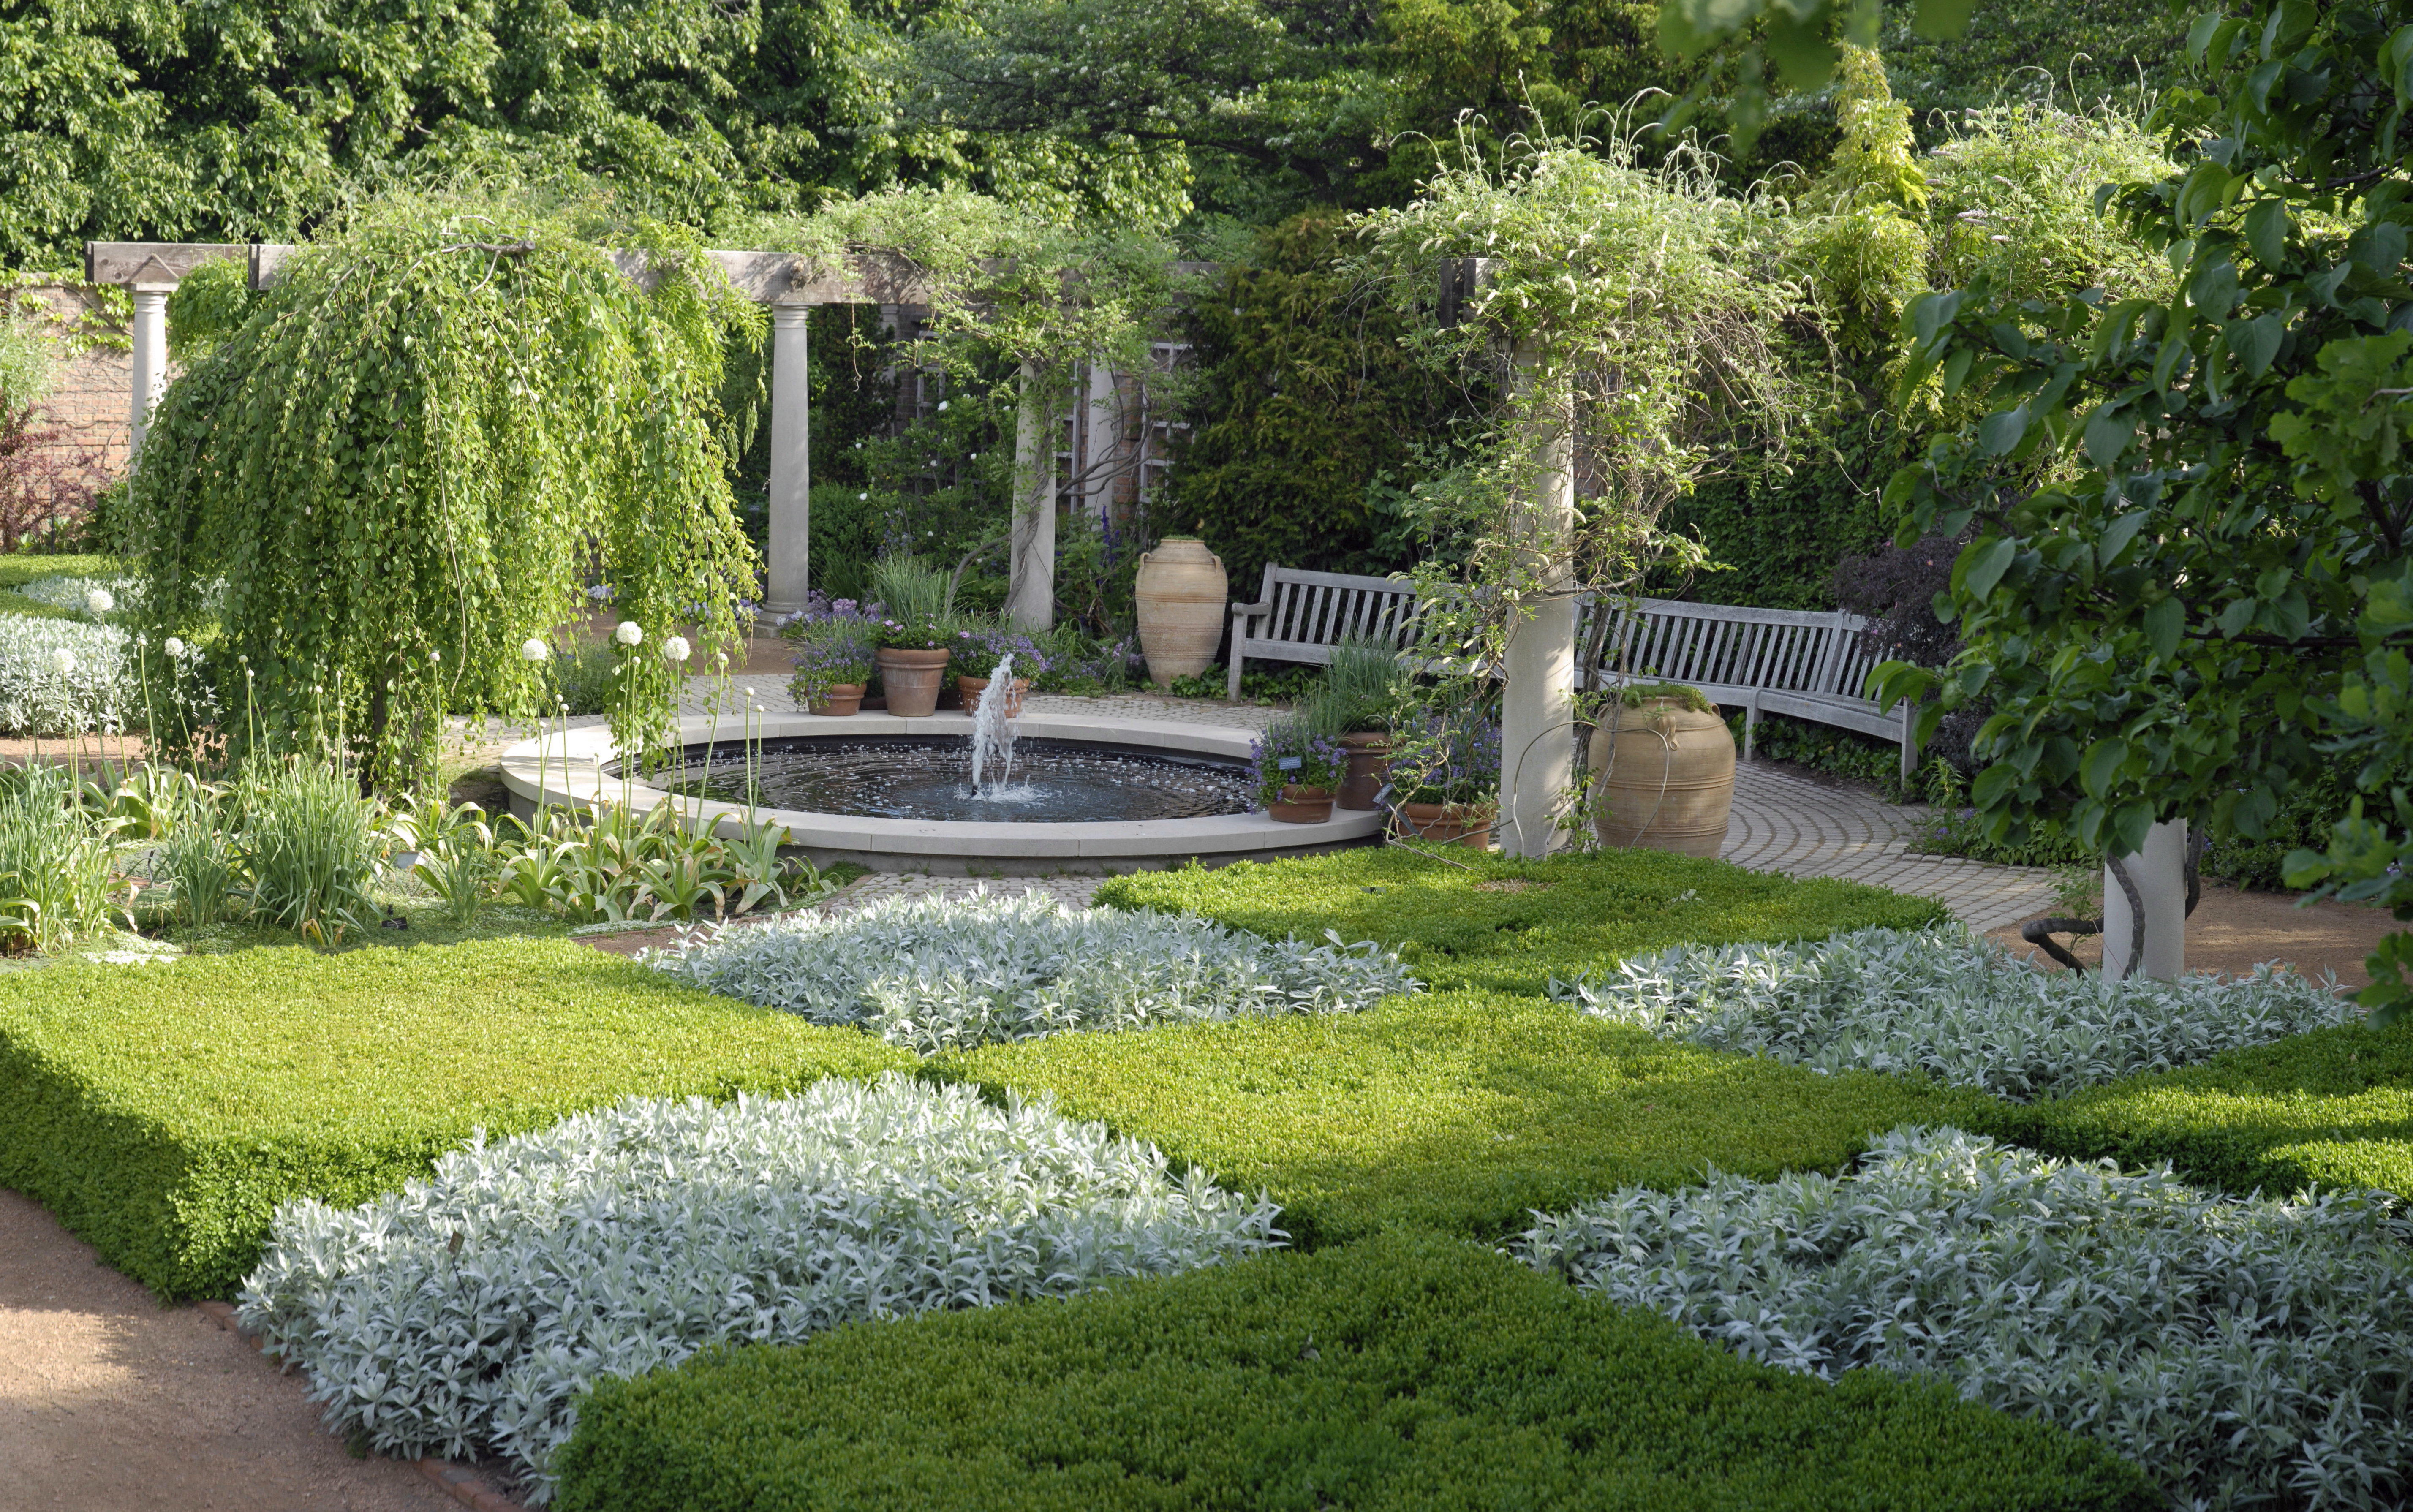 Garden Housecalls - See Gardens of the Upper Midwest, Featuring Chicago